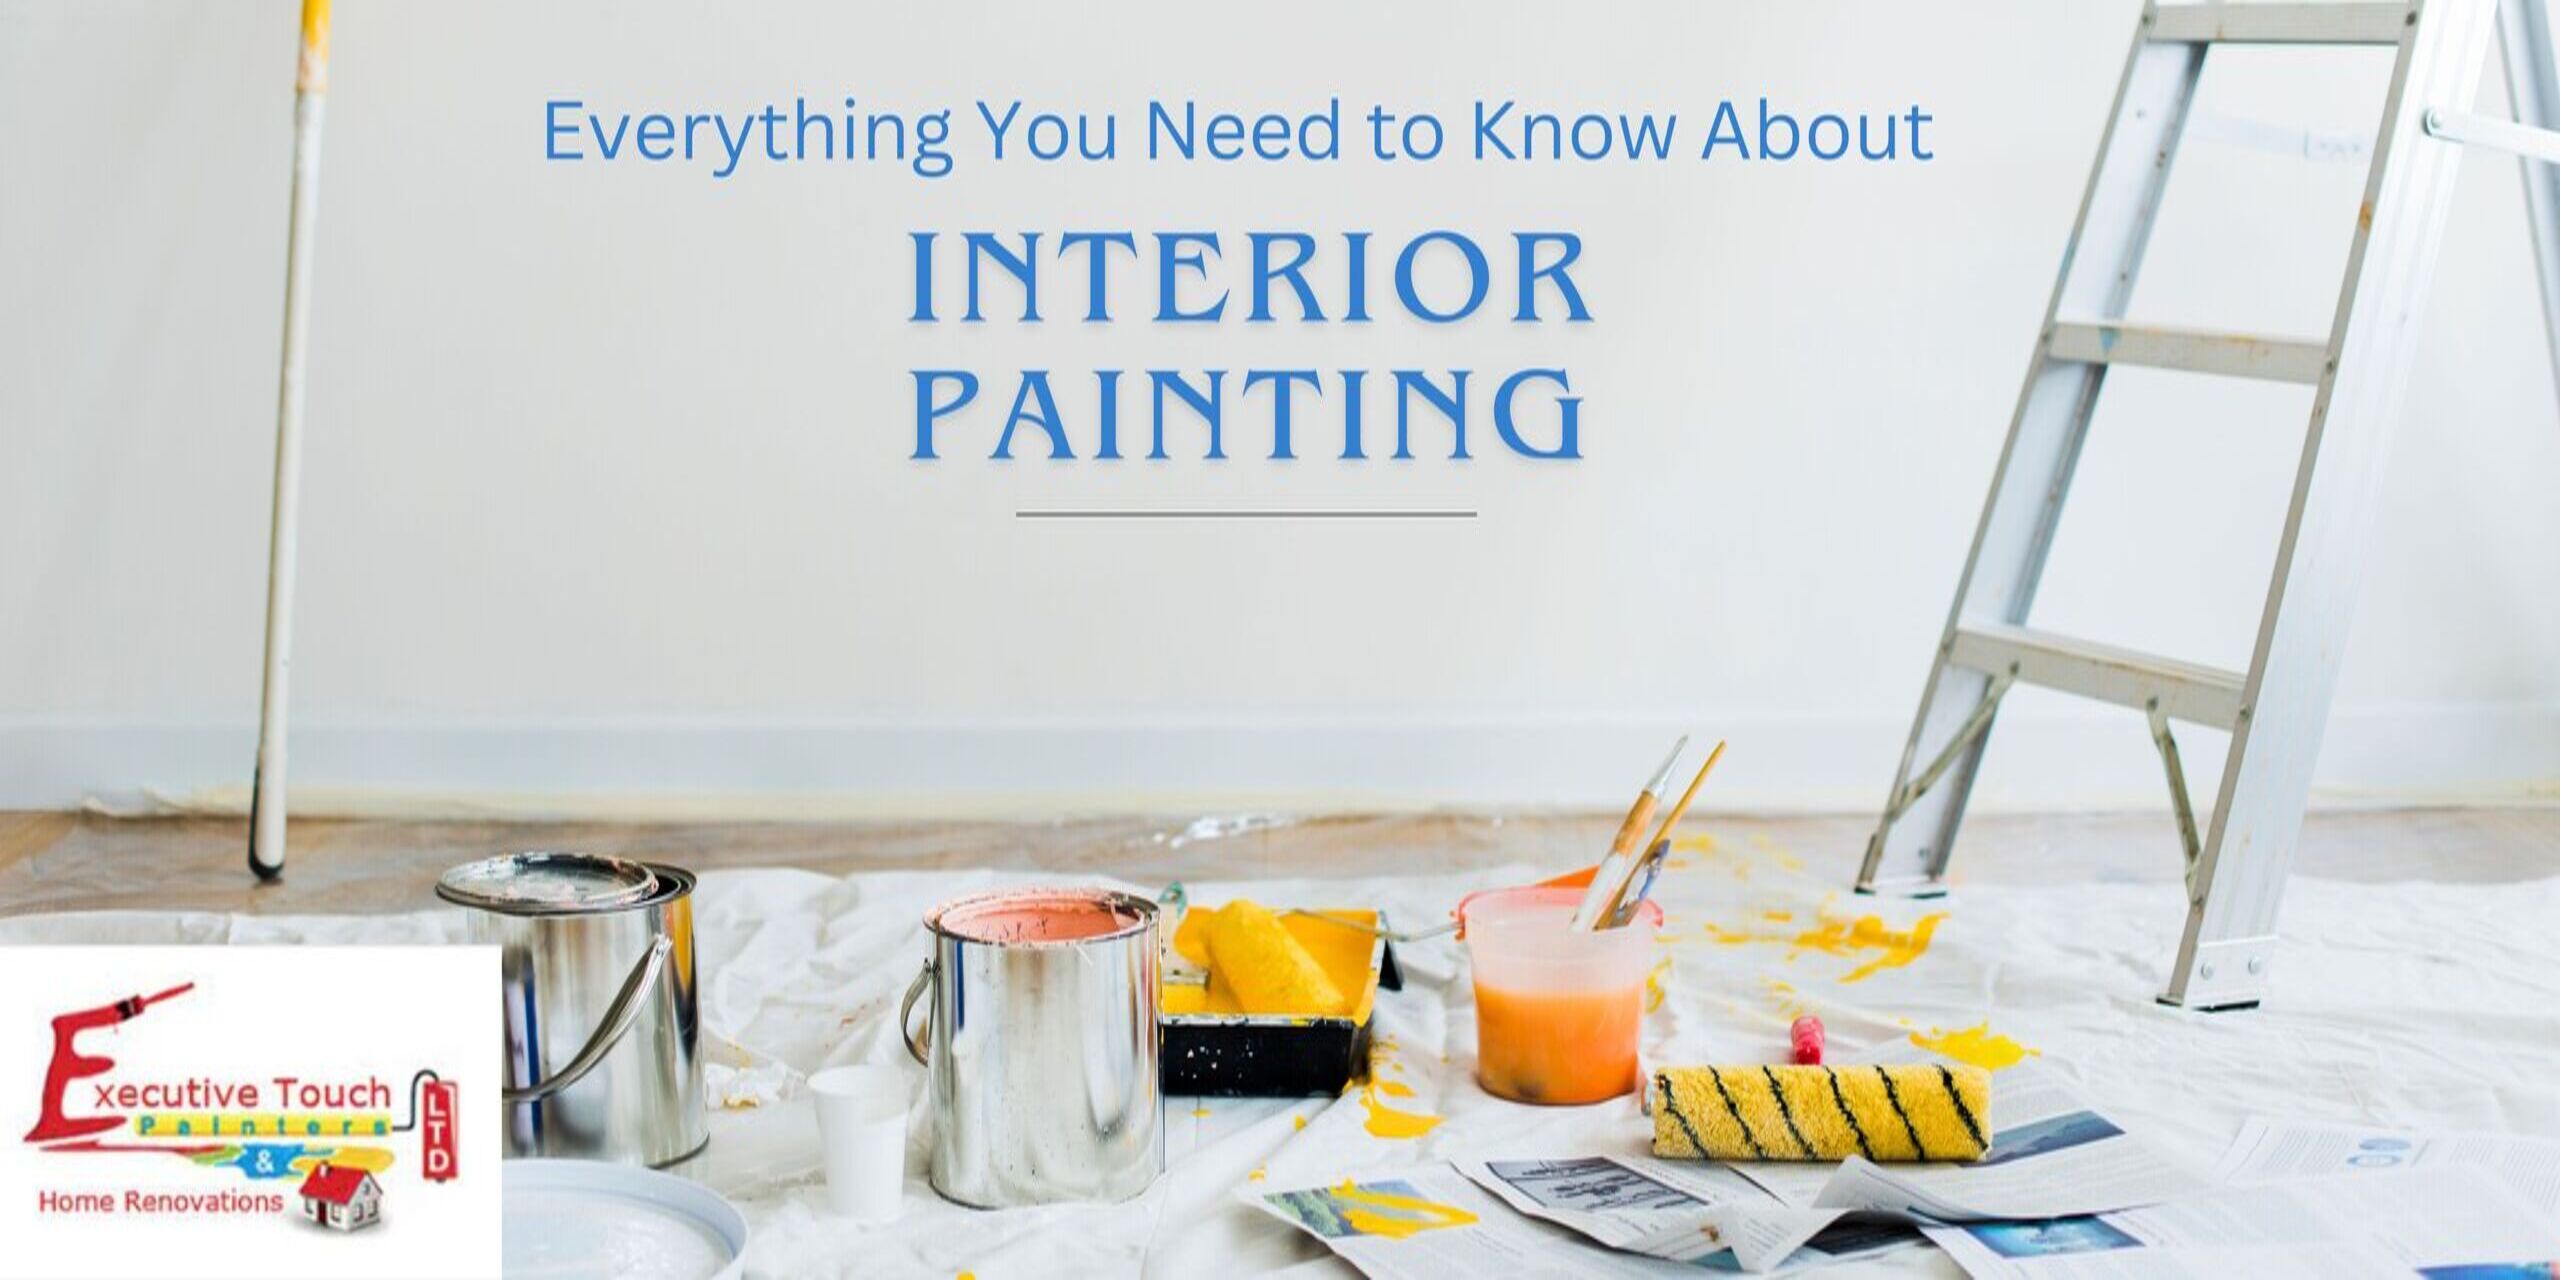 Everything You Need to Know About Interior Painting